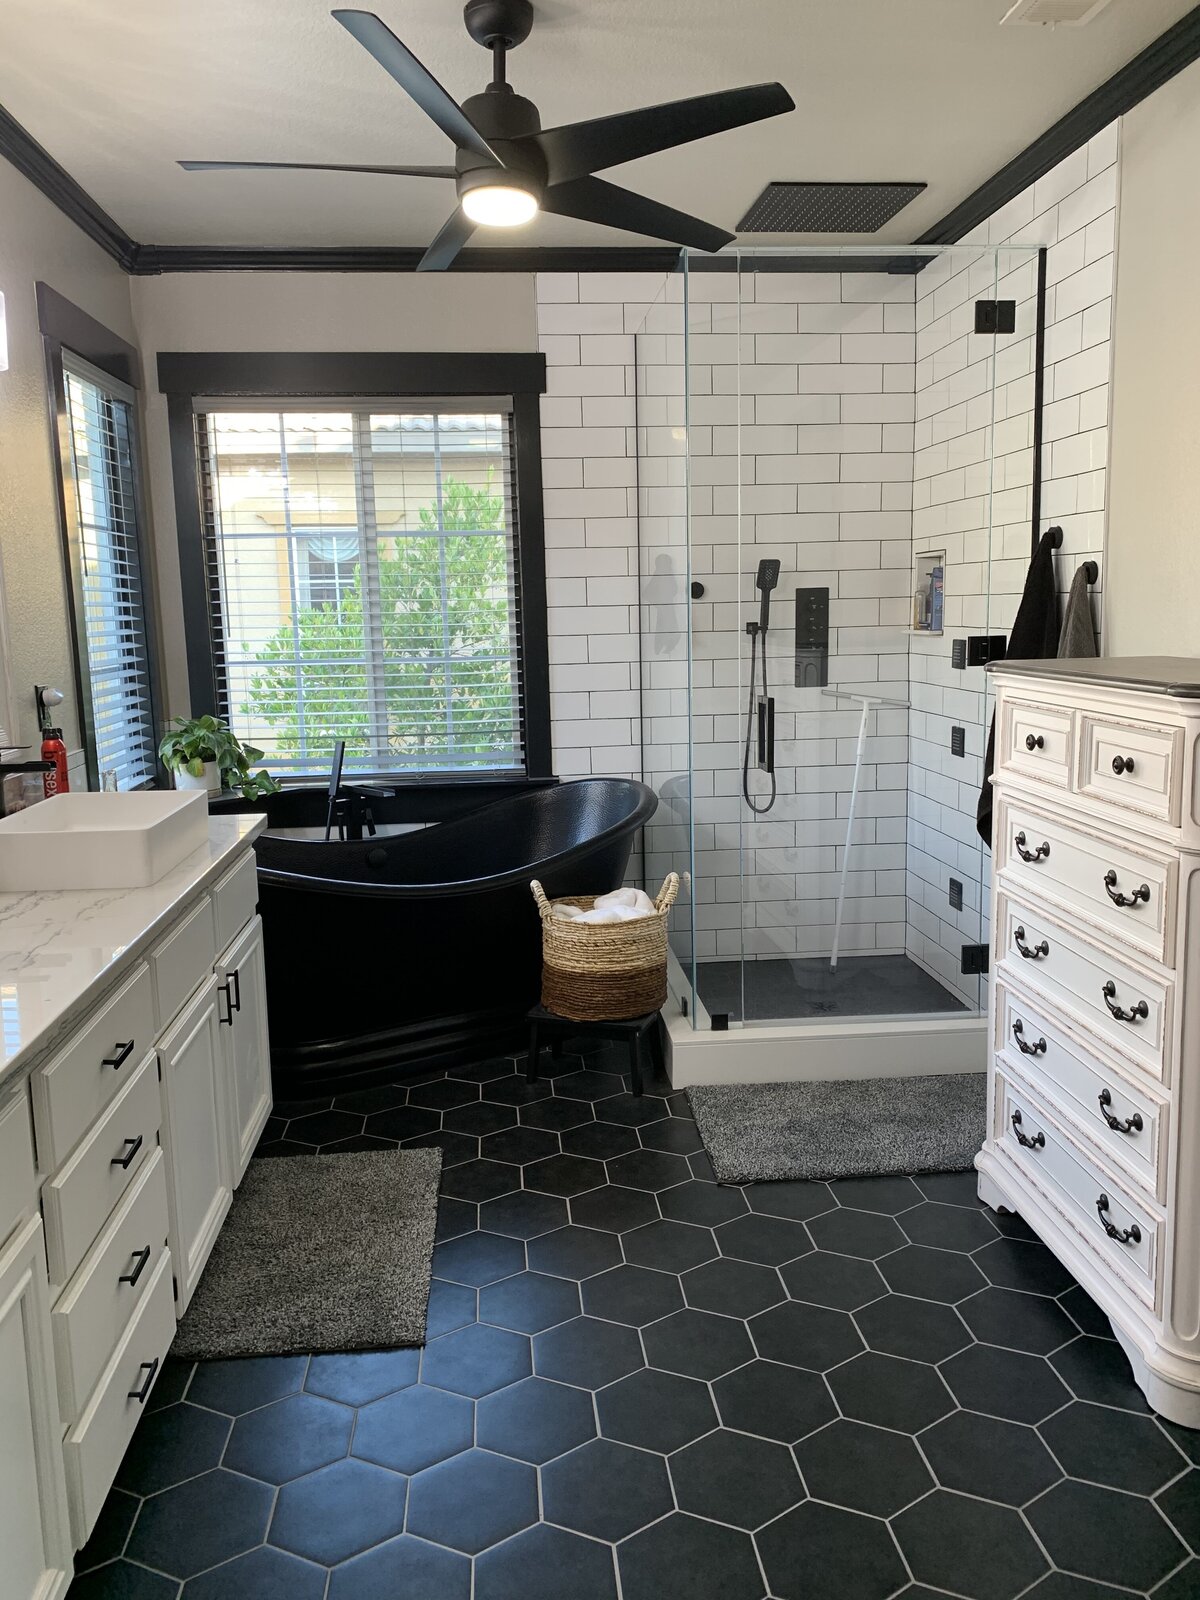 Black Hexagon tile in a bathroom with white vanity, subway tile shower, and a large freestanding black bathtub.